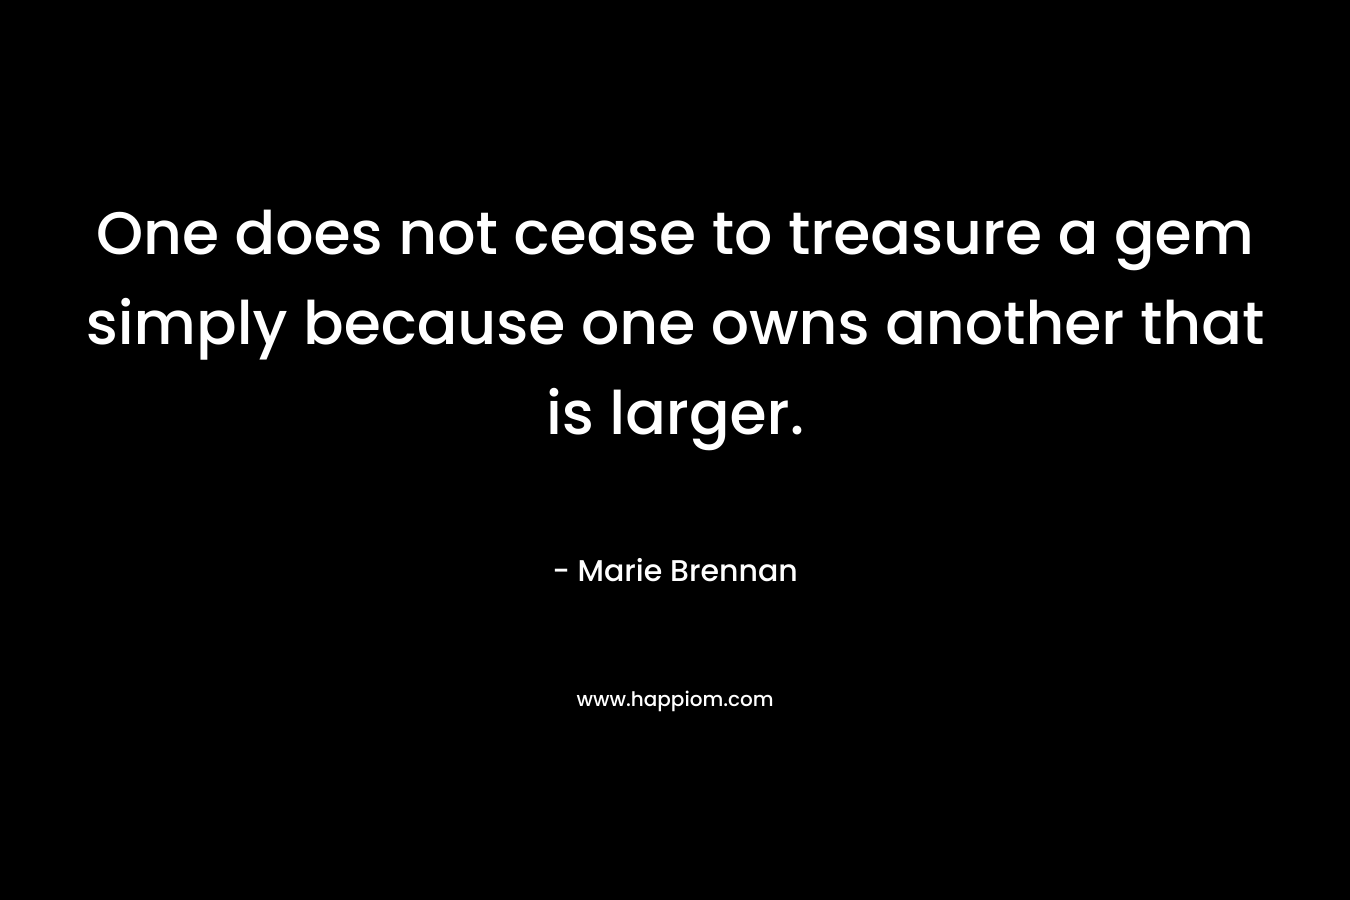 One does not cease to treasure a gem simply because one owns another that is larger. – Marie Brennan